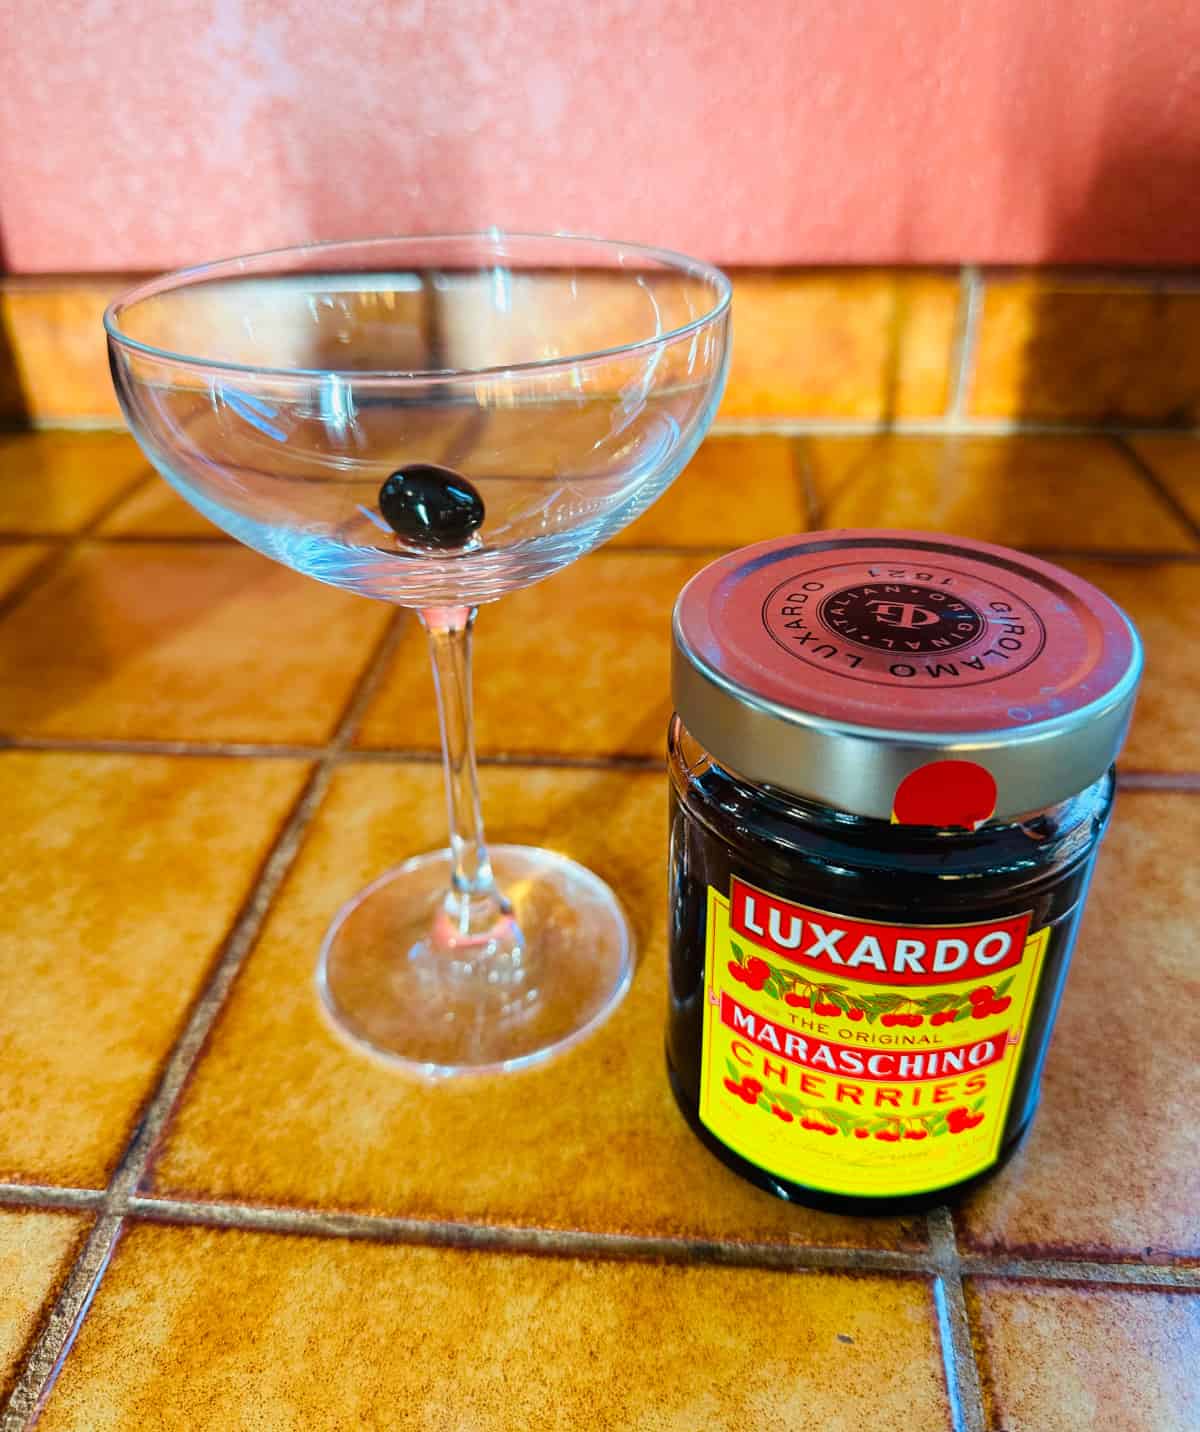 Coupe glass with a maraschino cherry in the bottom next to a jar of luxardo cherries.